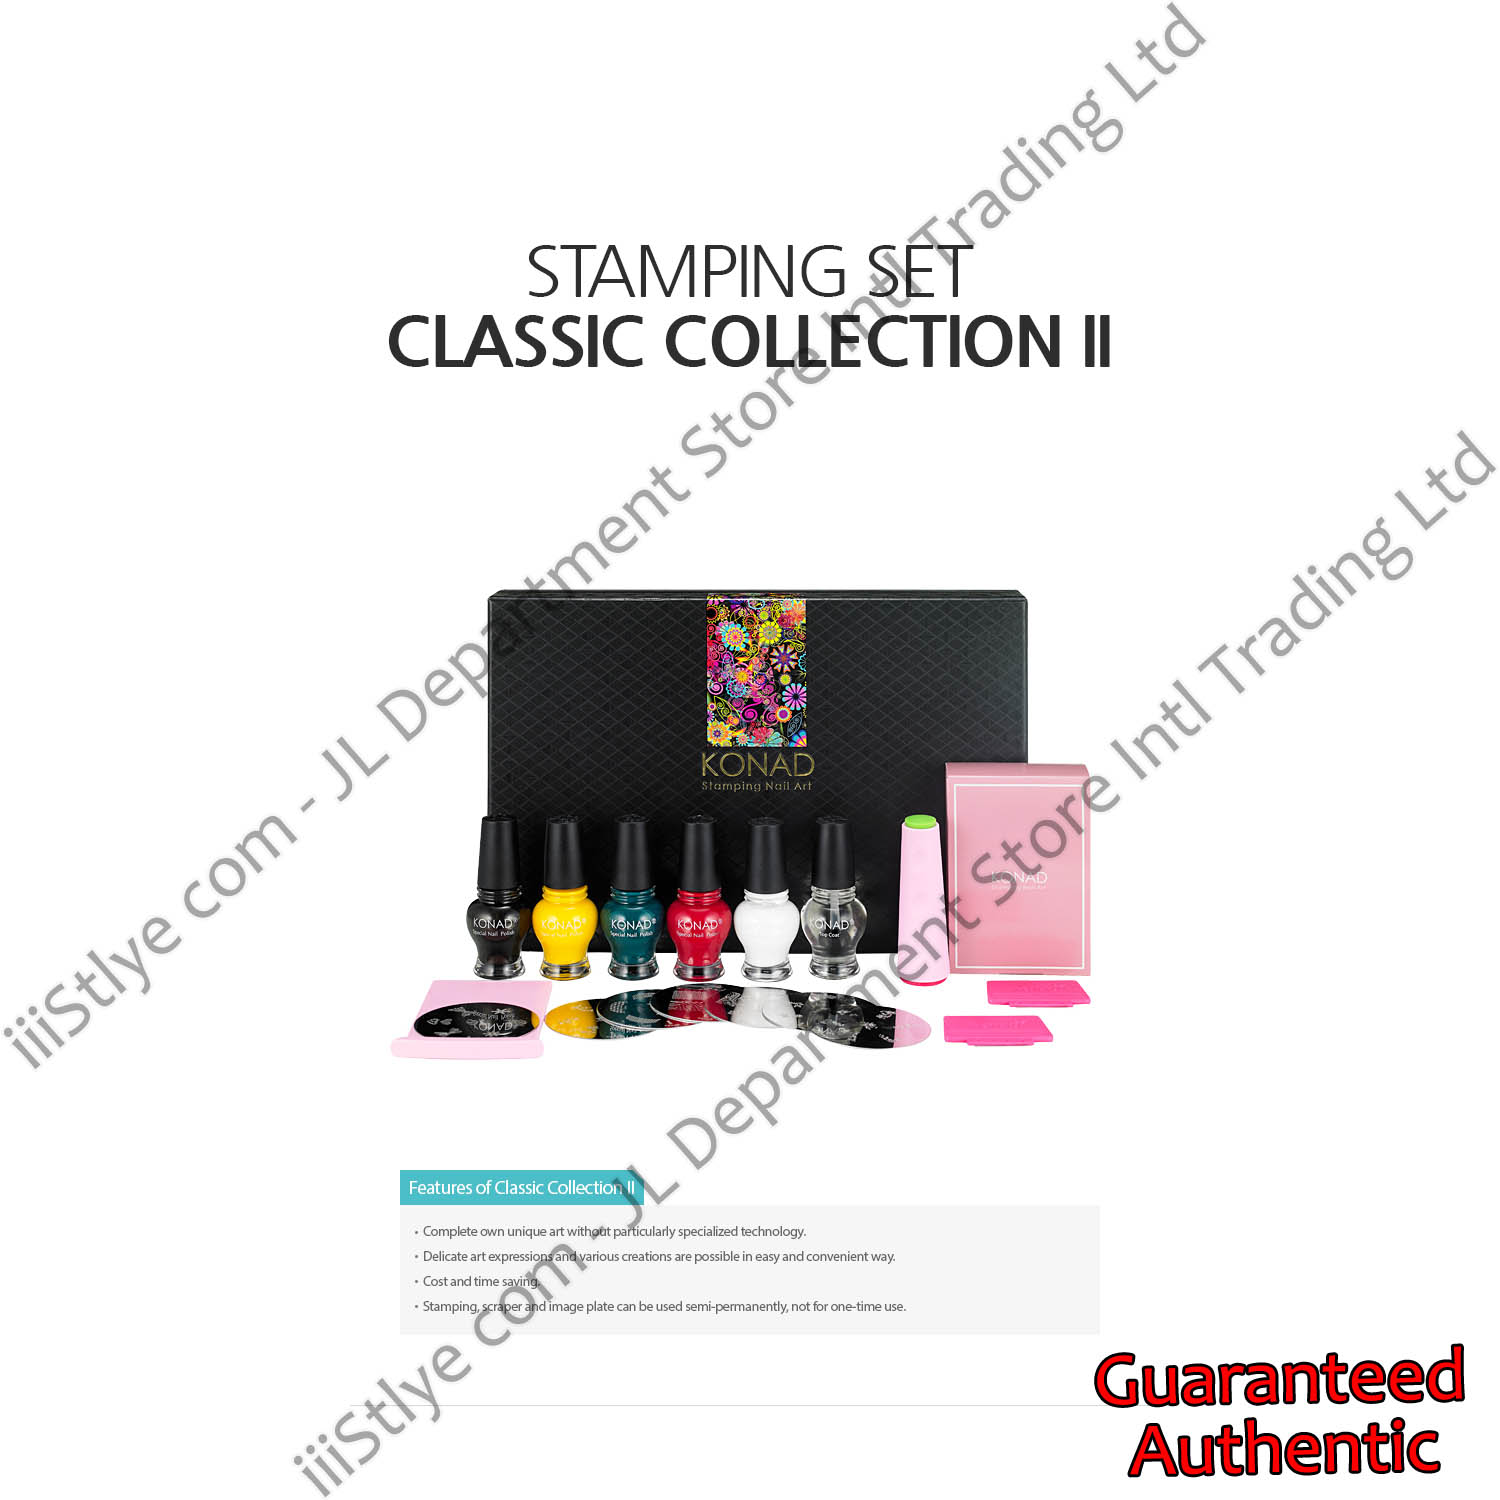 stamping set classic collection II